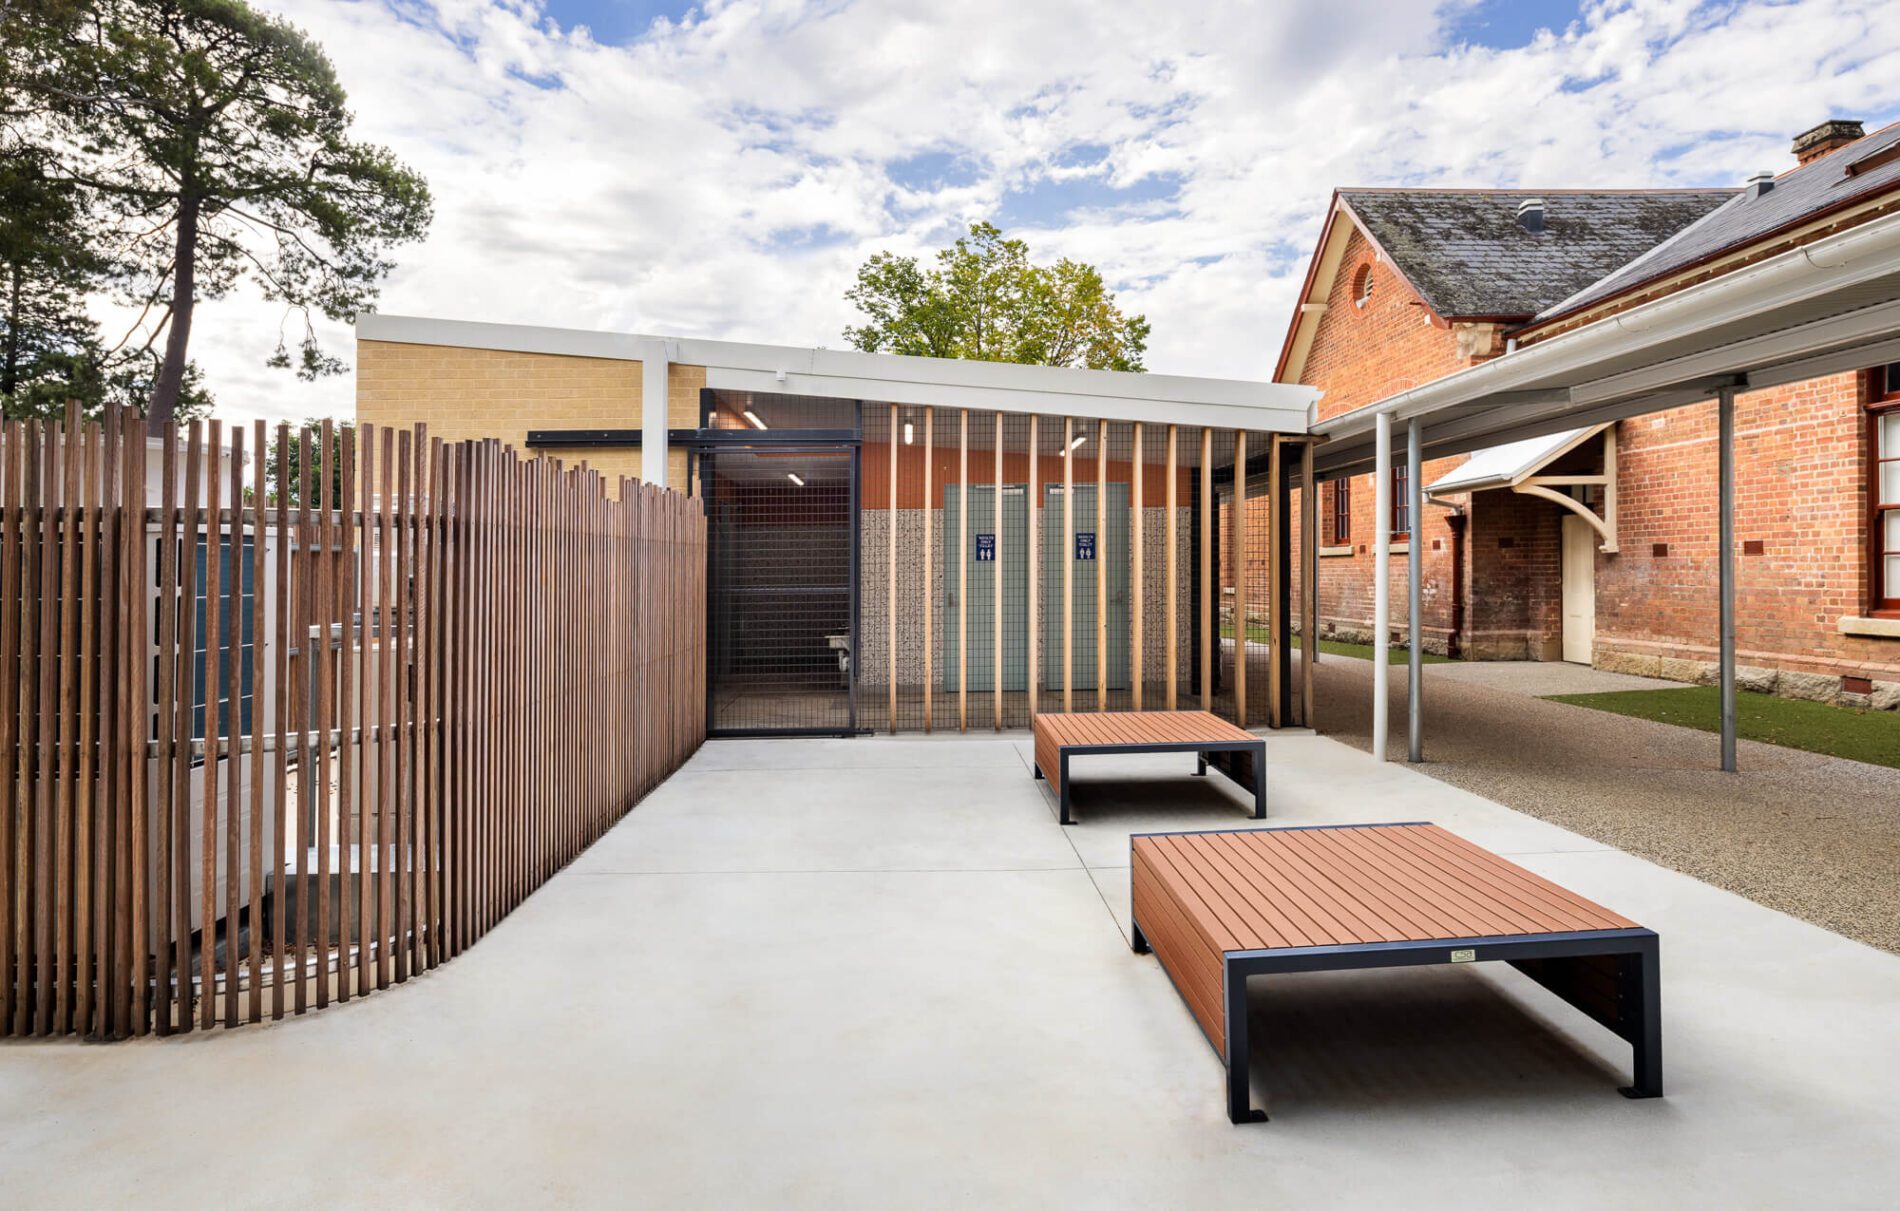 Outdoor paved seating area next to walkway, timber and metal screen to adjacent toilets